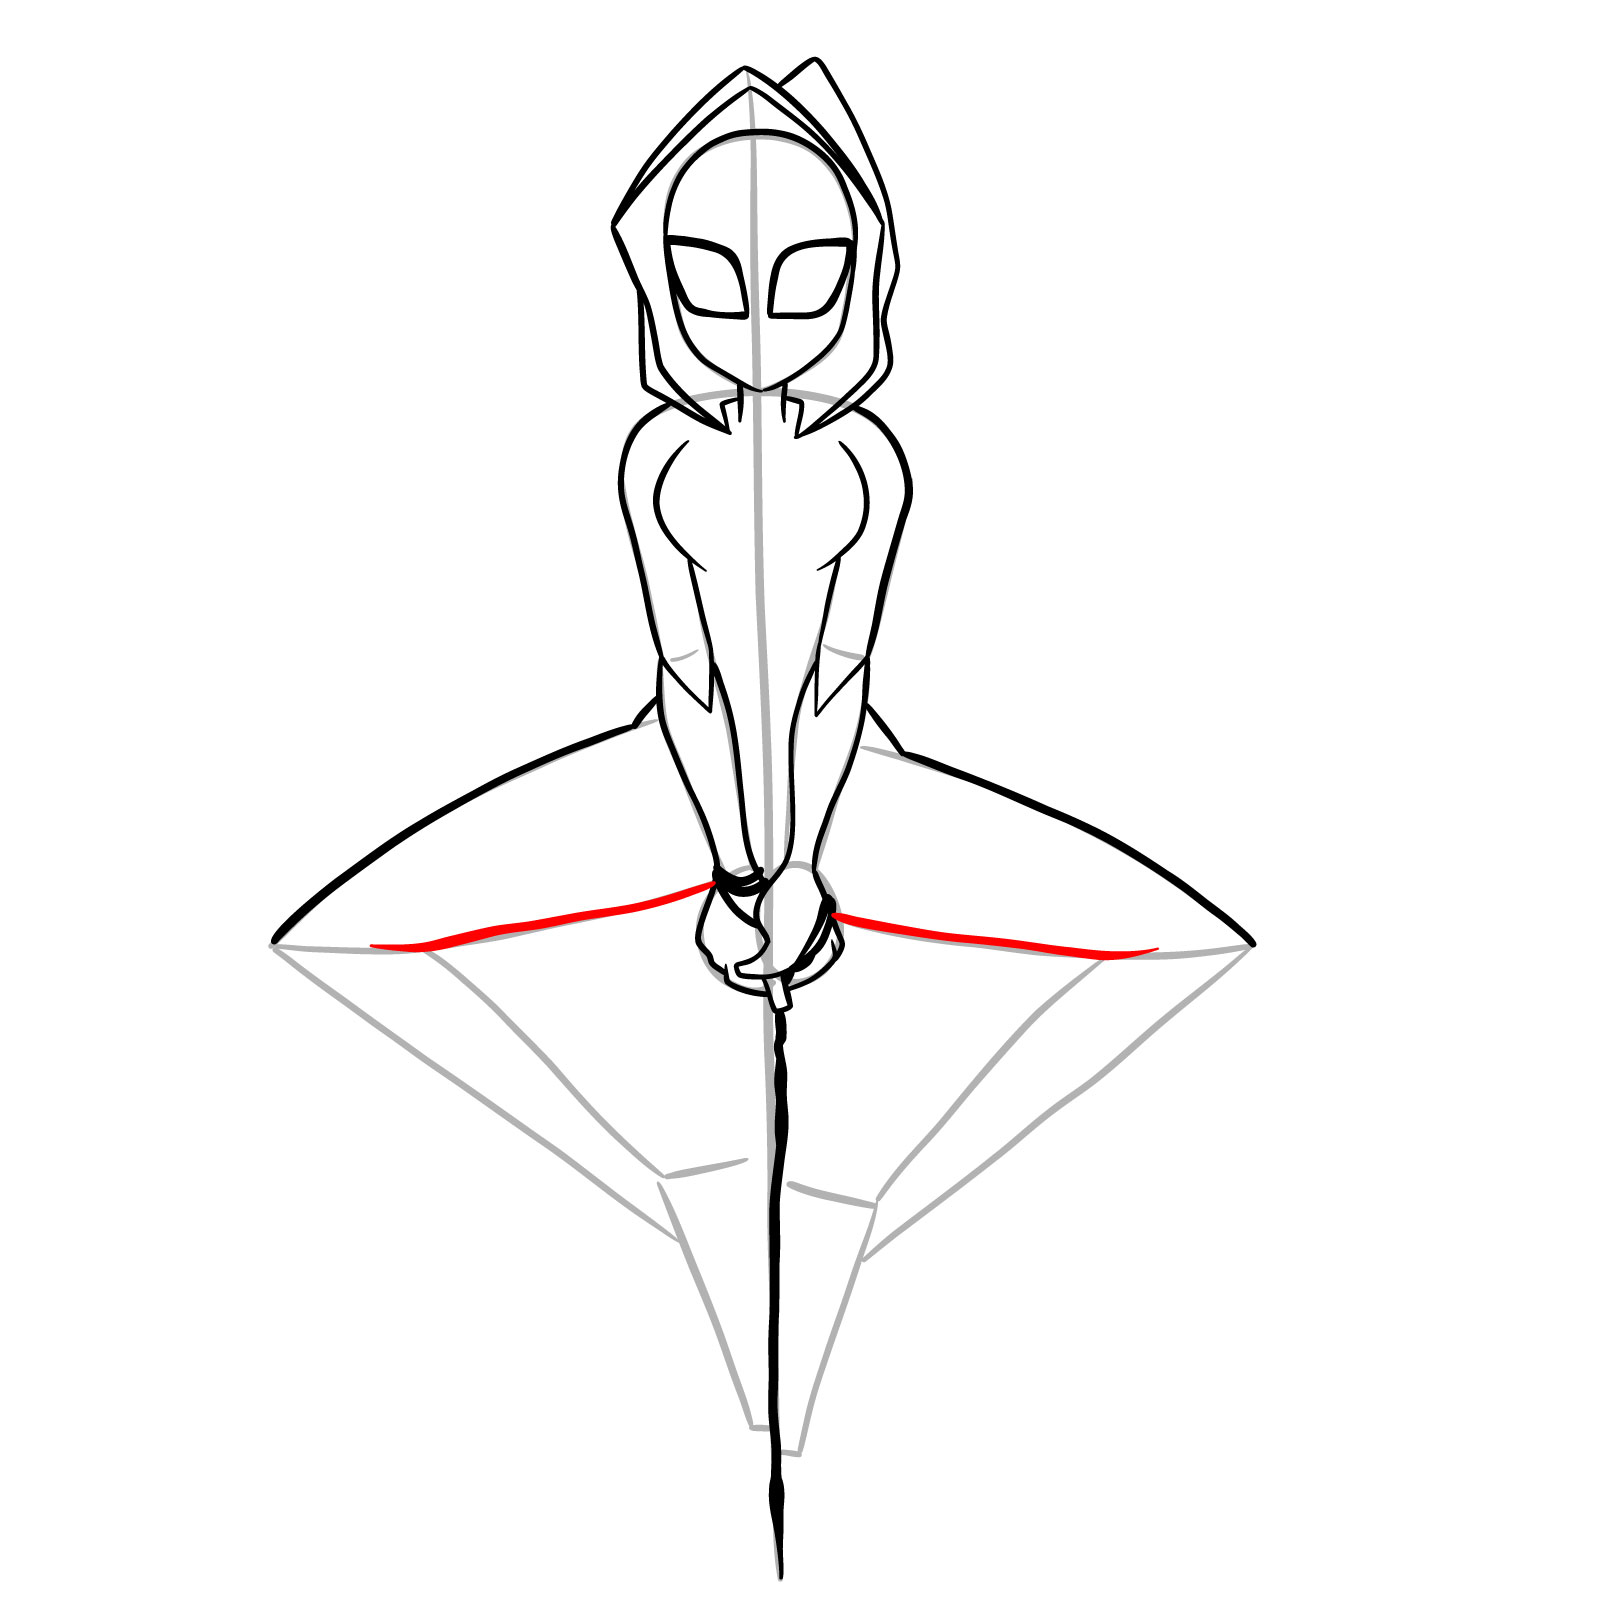 How to draw Spider-Gwen hanging on a web - step 21